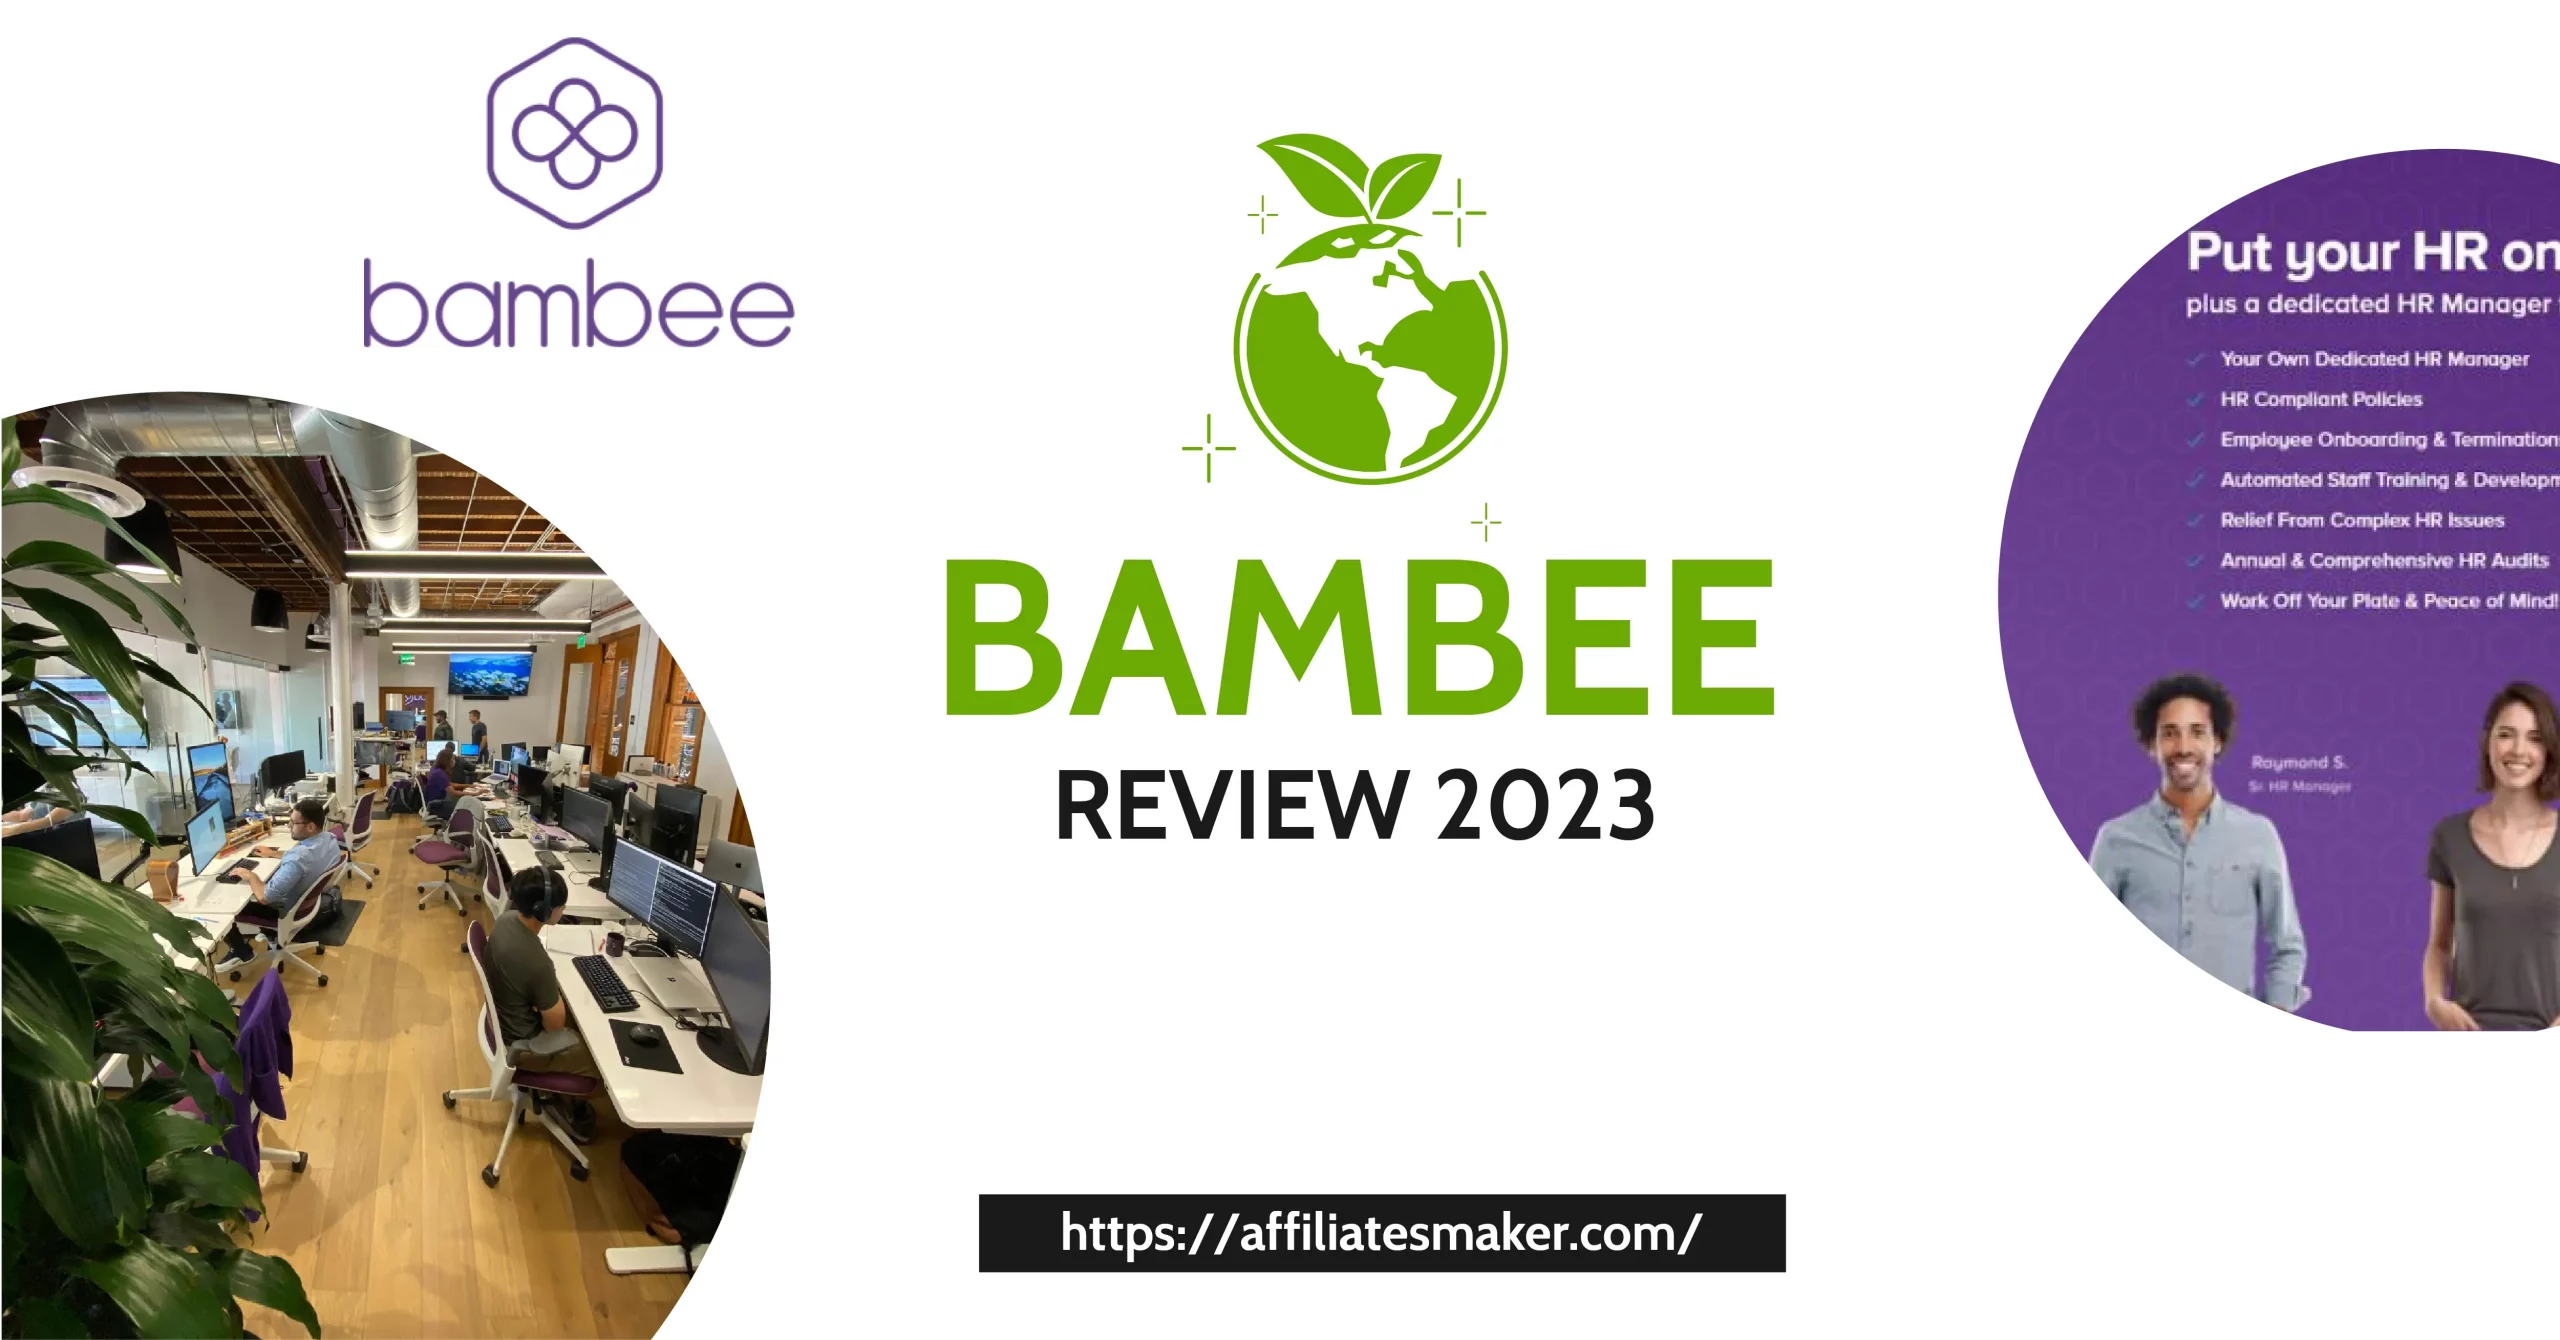 Bambee Review 2023, Bambee Features, Bambee banner 2023